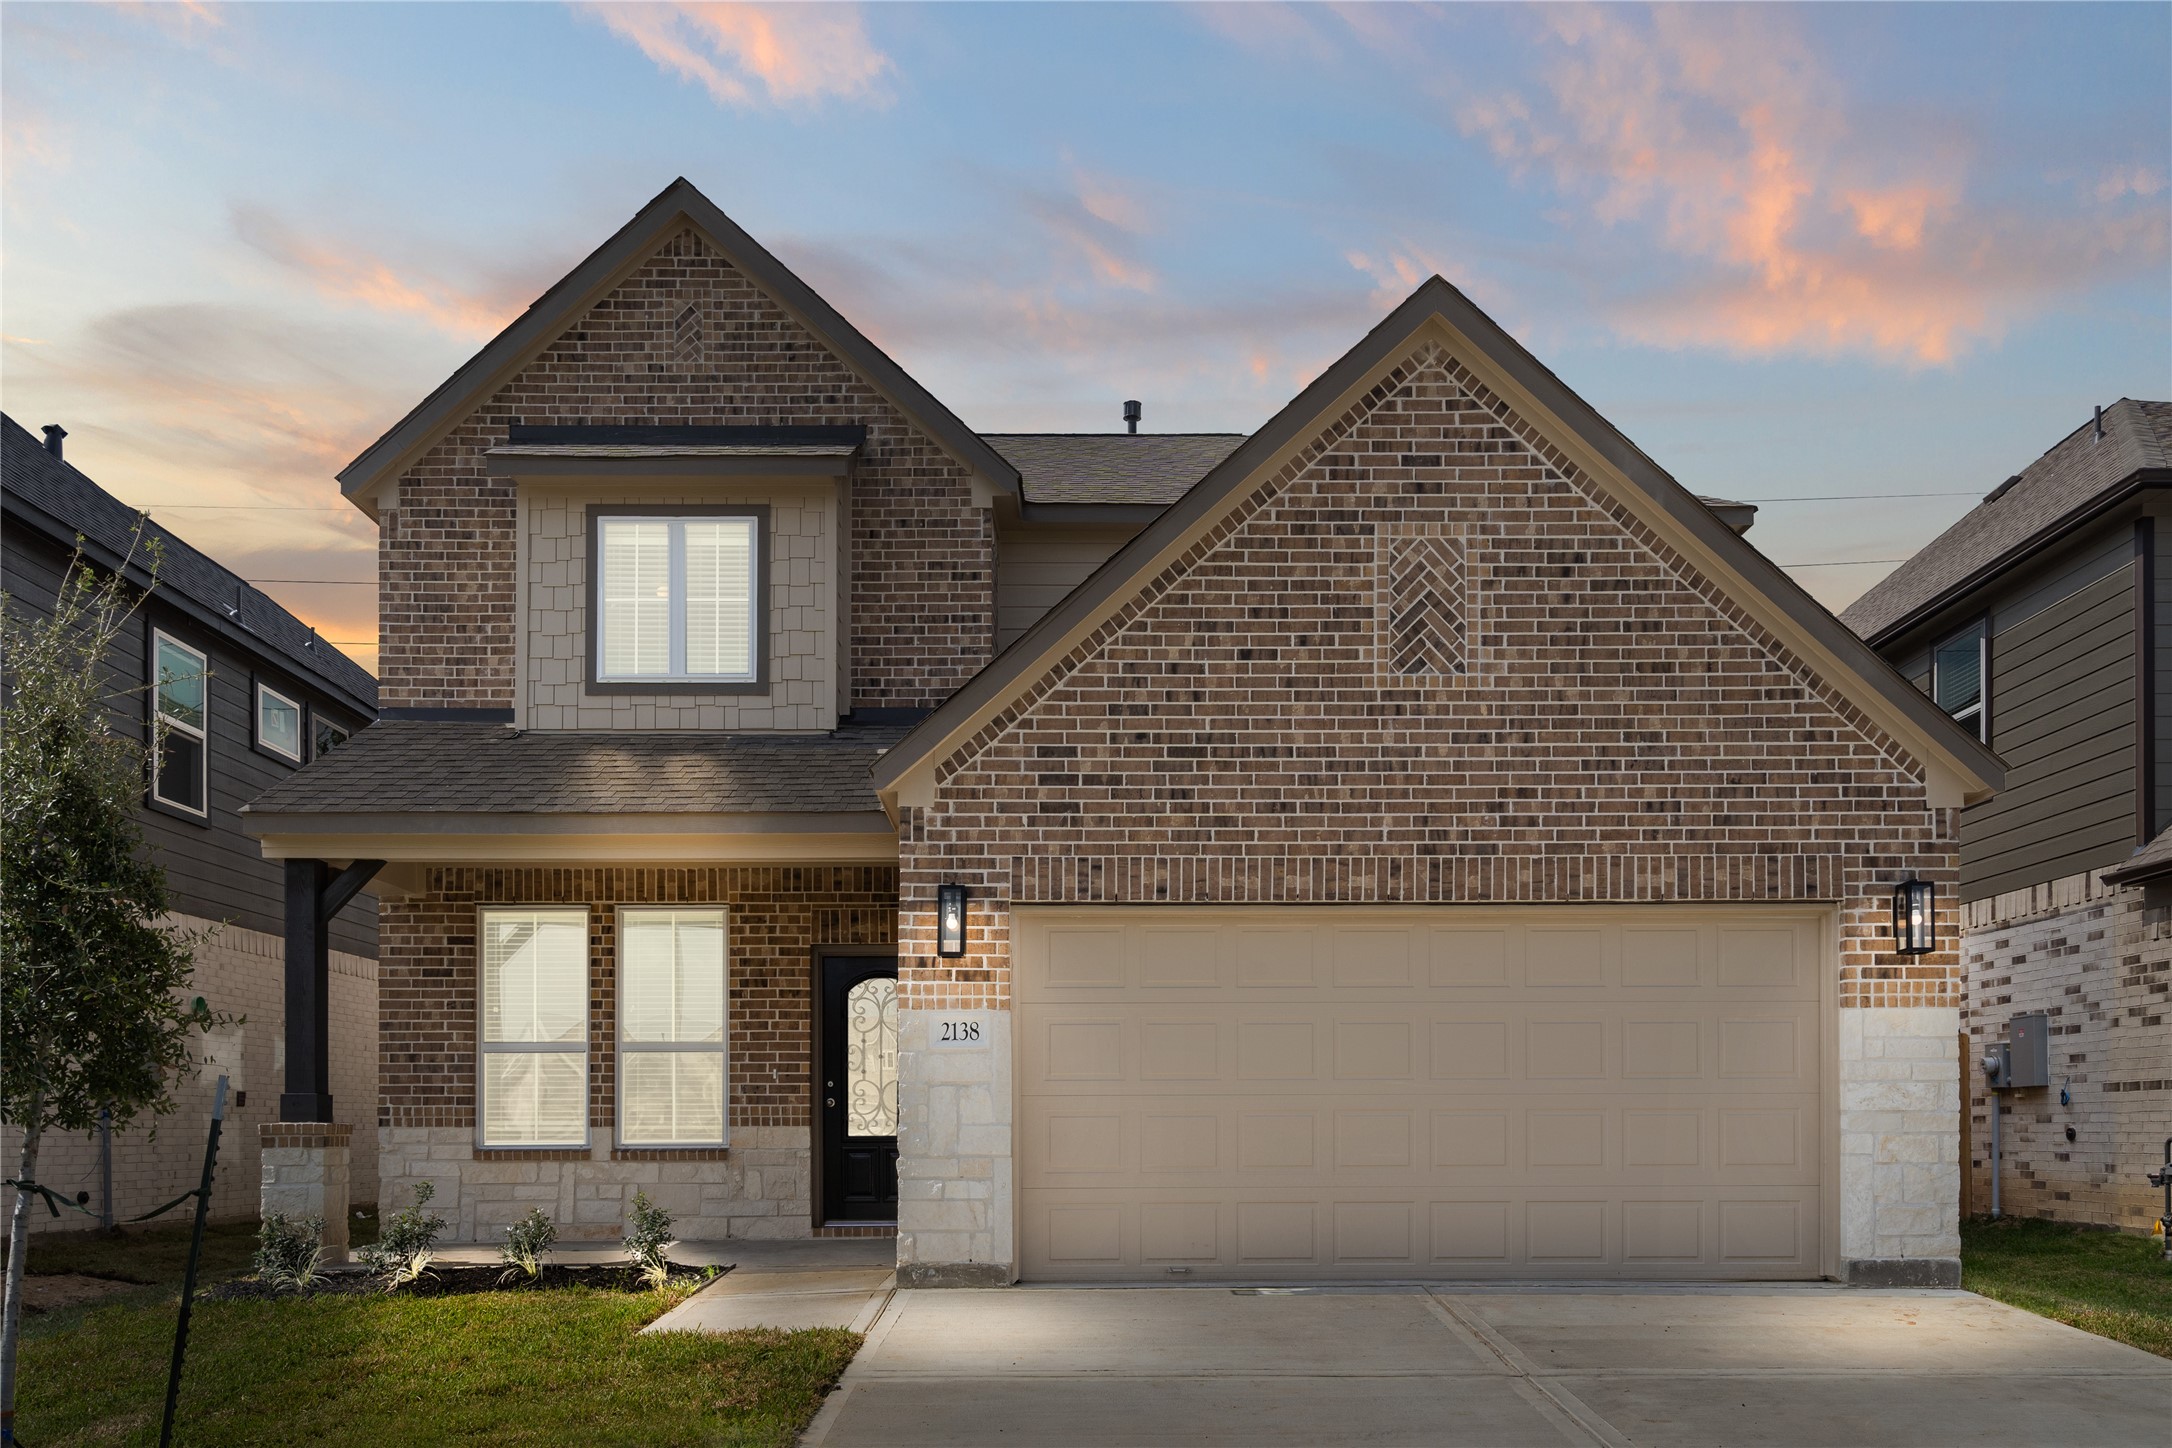 Welcome home to 2138 Reed Cave Lane located in Forest Village and zoned to Conroe ISD.